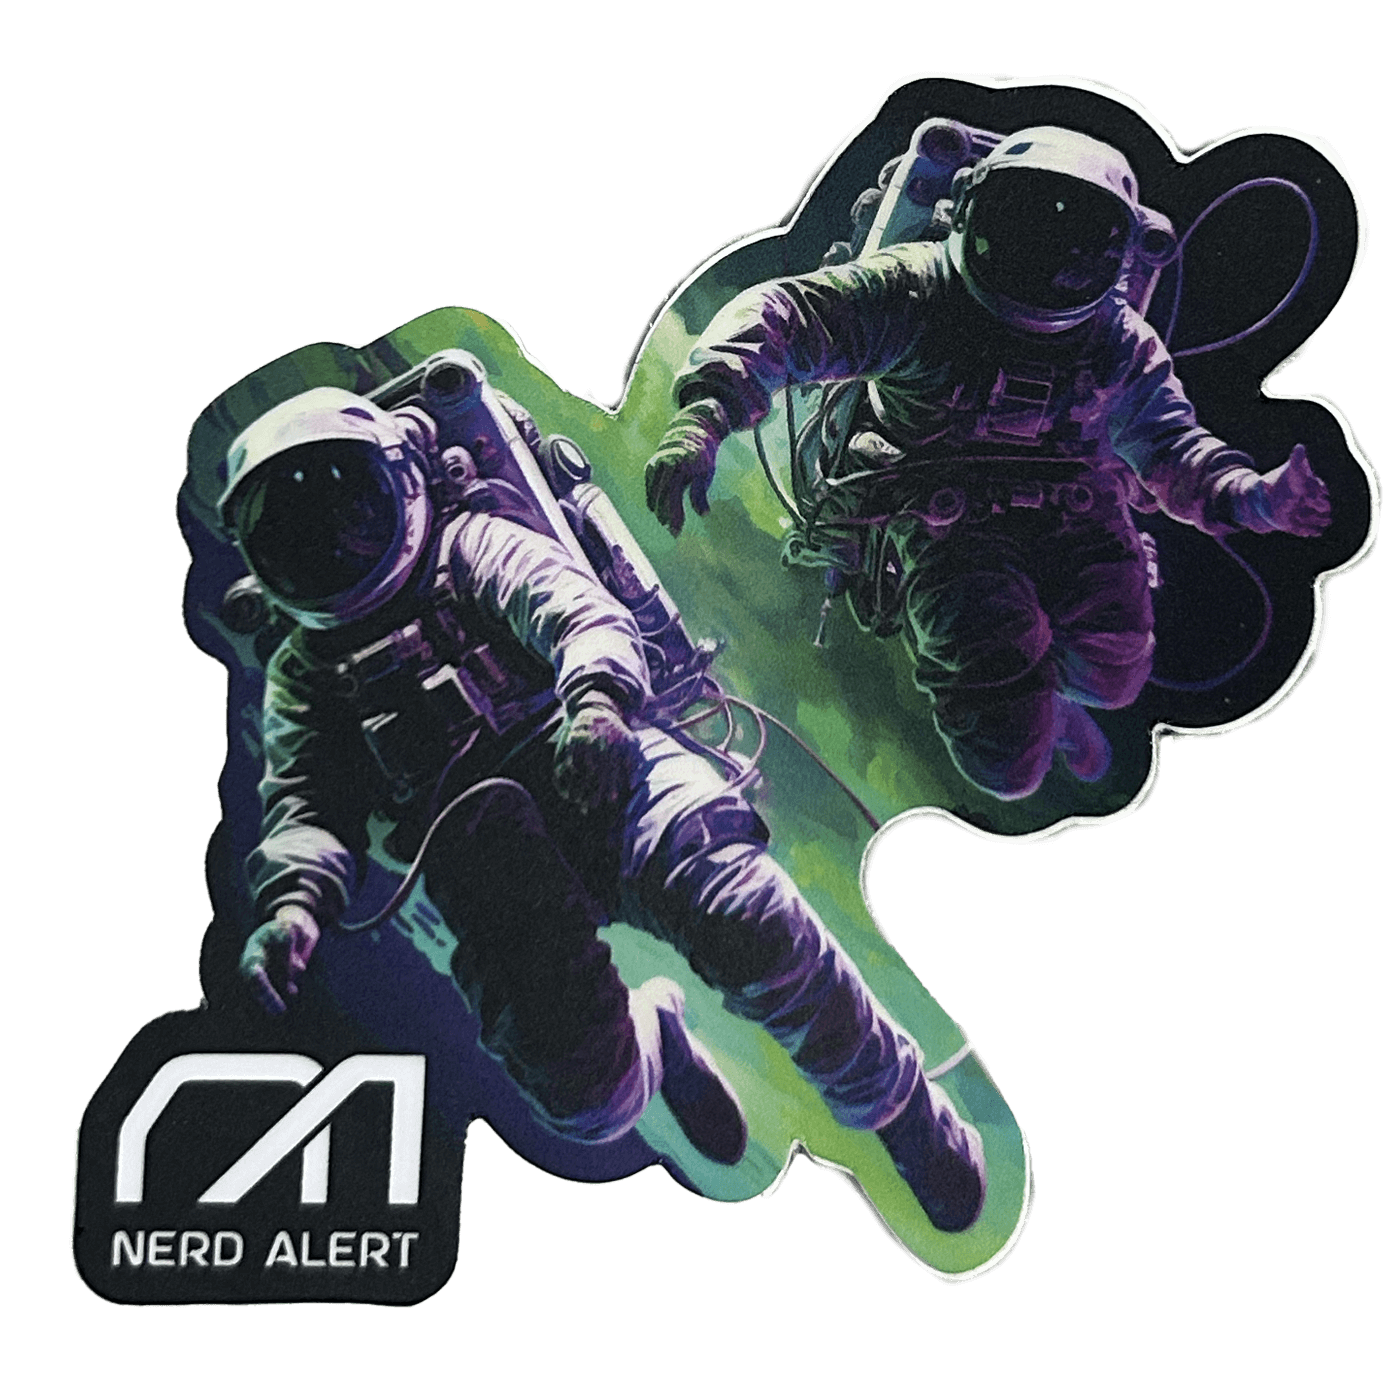 Two spacemen floating in front of a green and purple galaxy with the Nerd Alert logo in the bottom left corner.